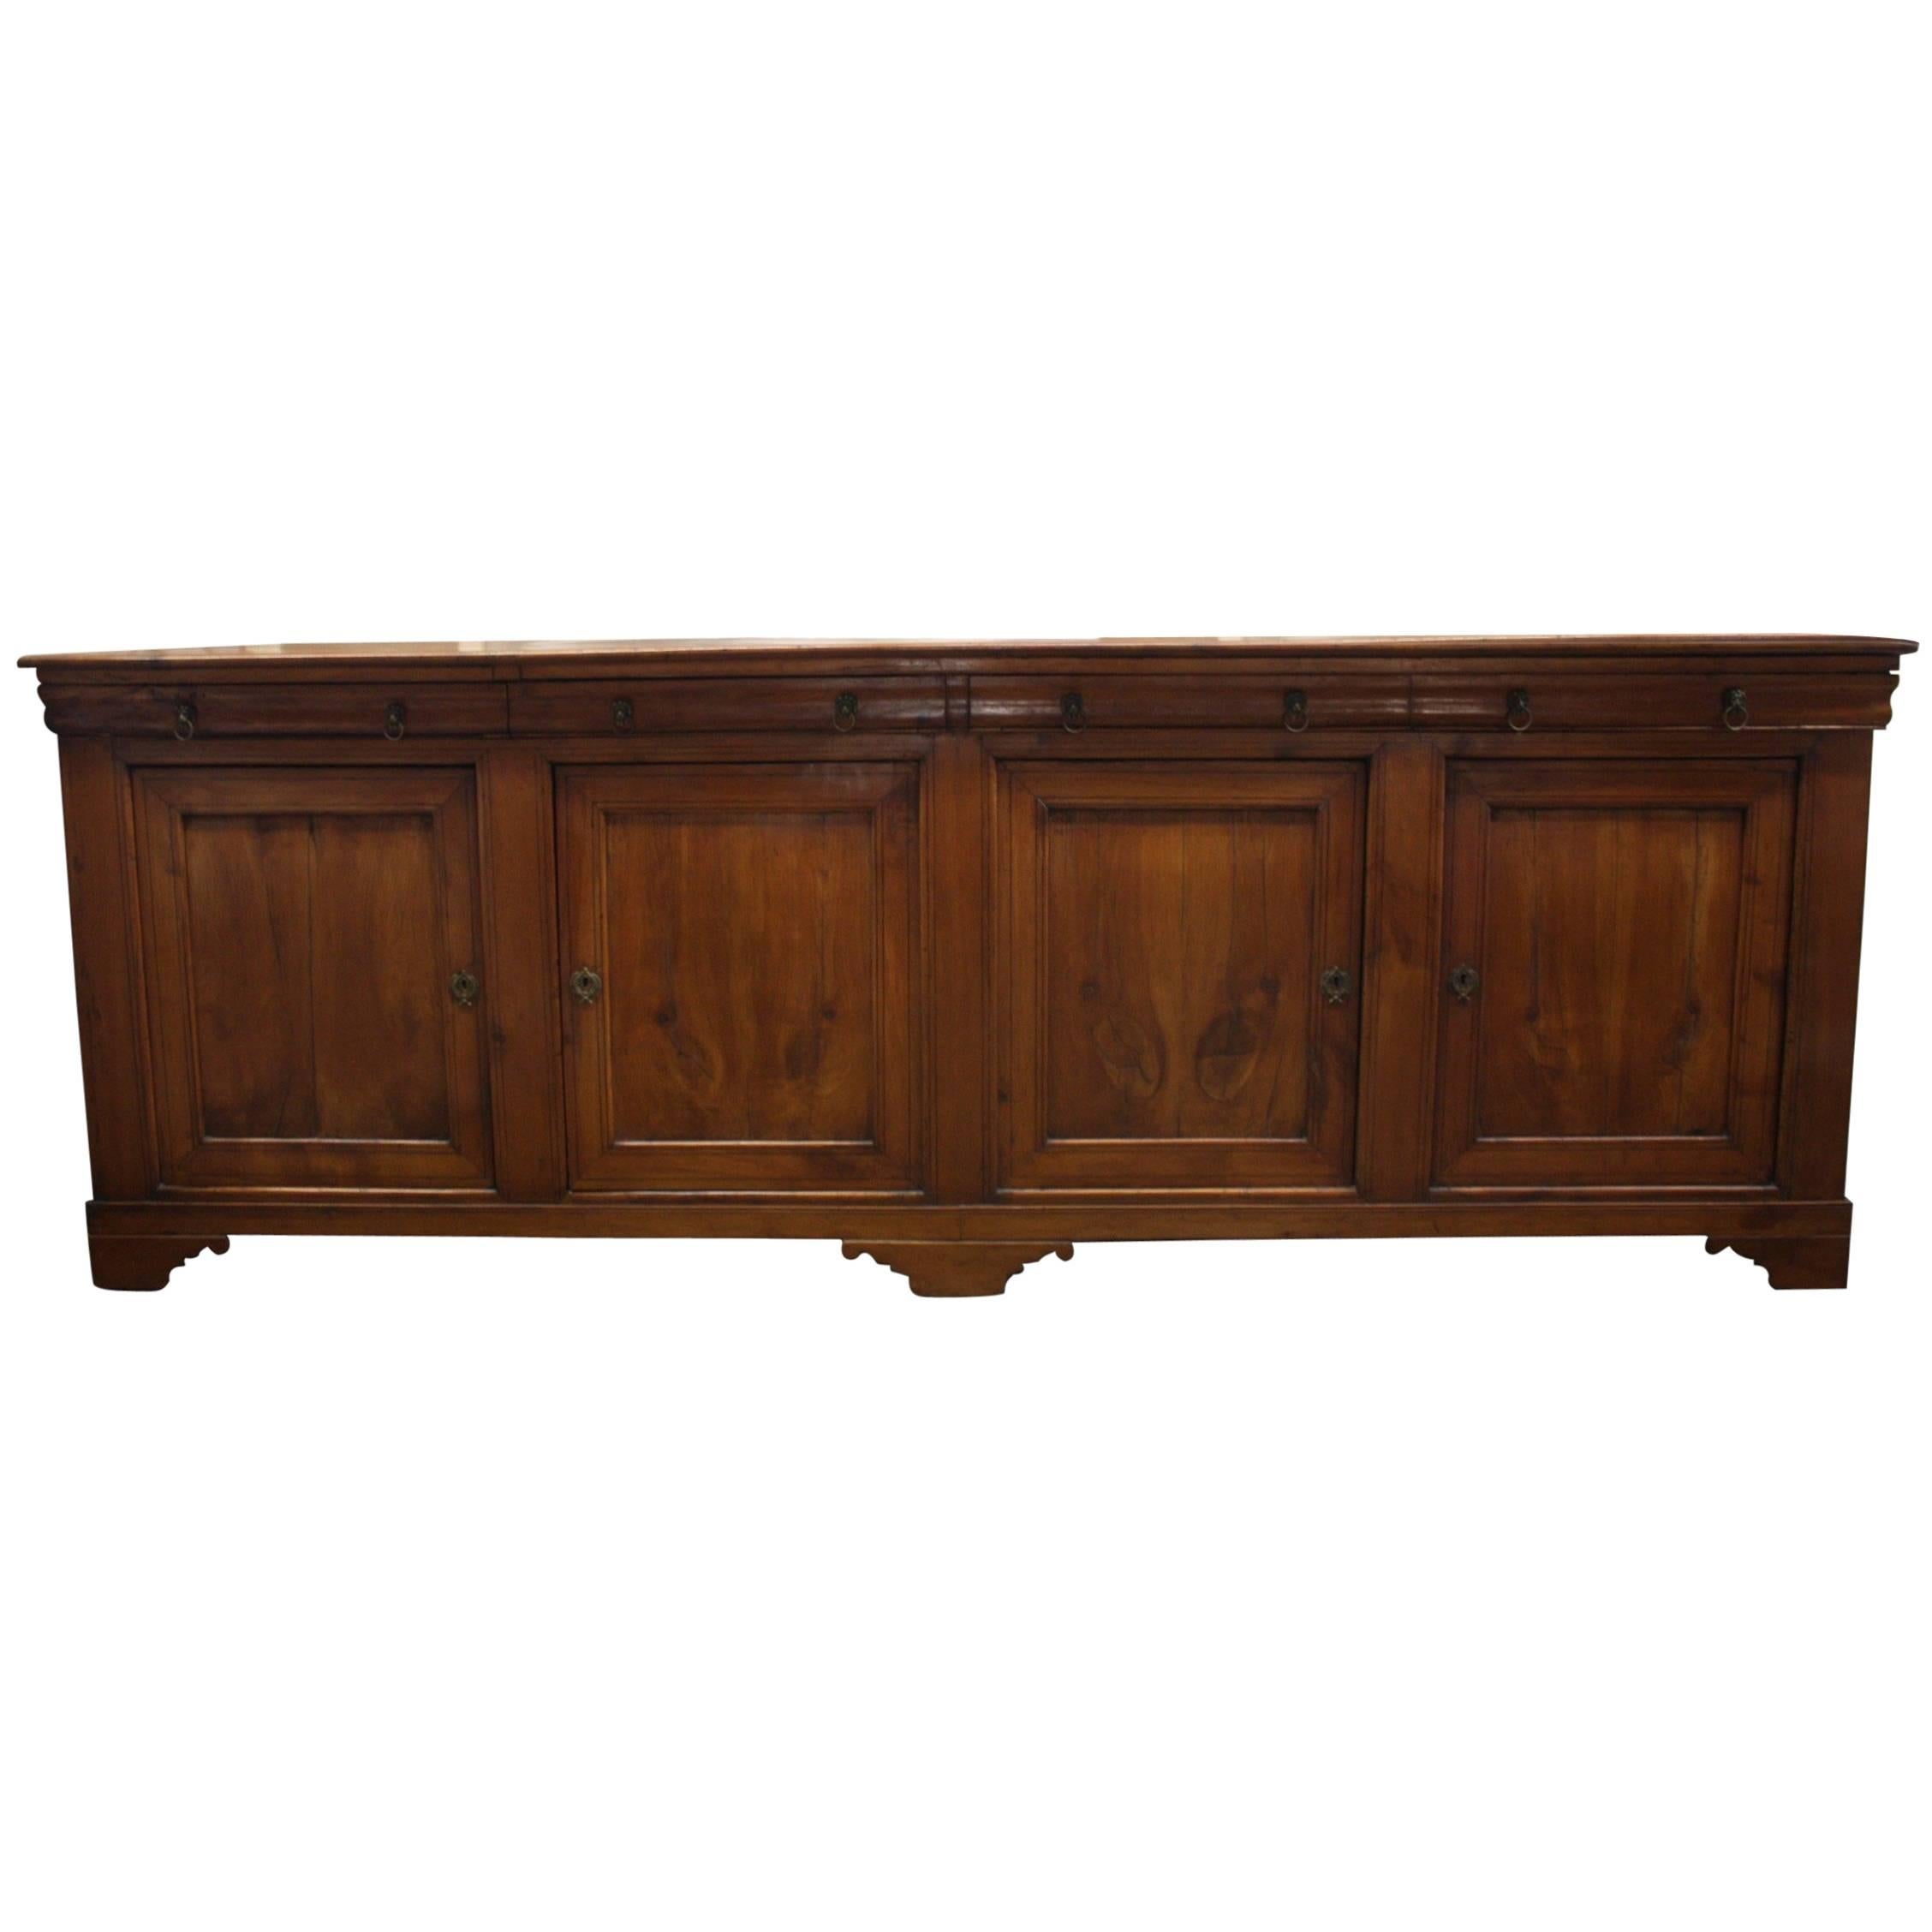 Magnificent Early 19th Century French Sideboard